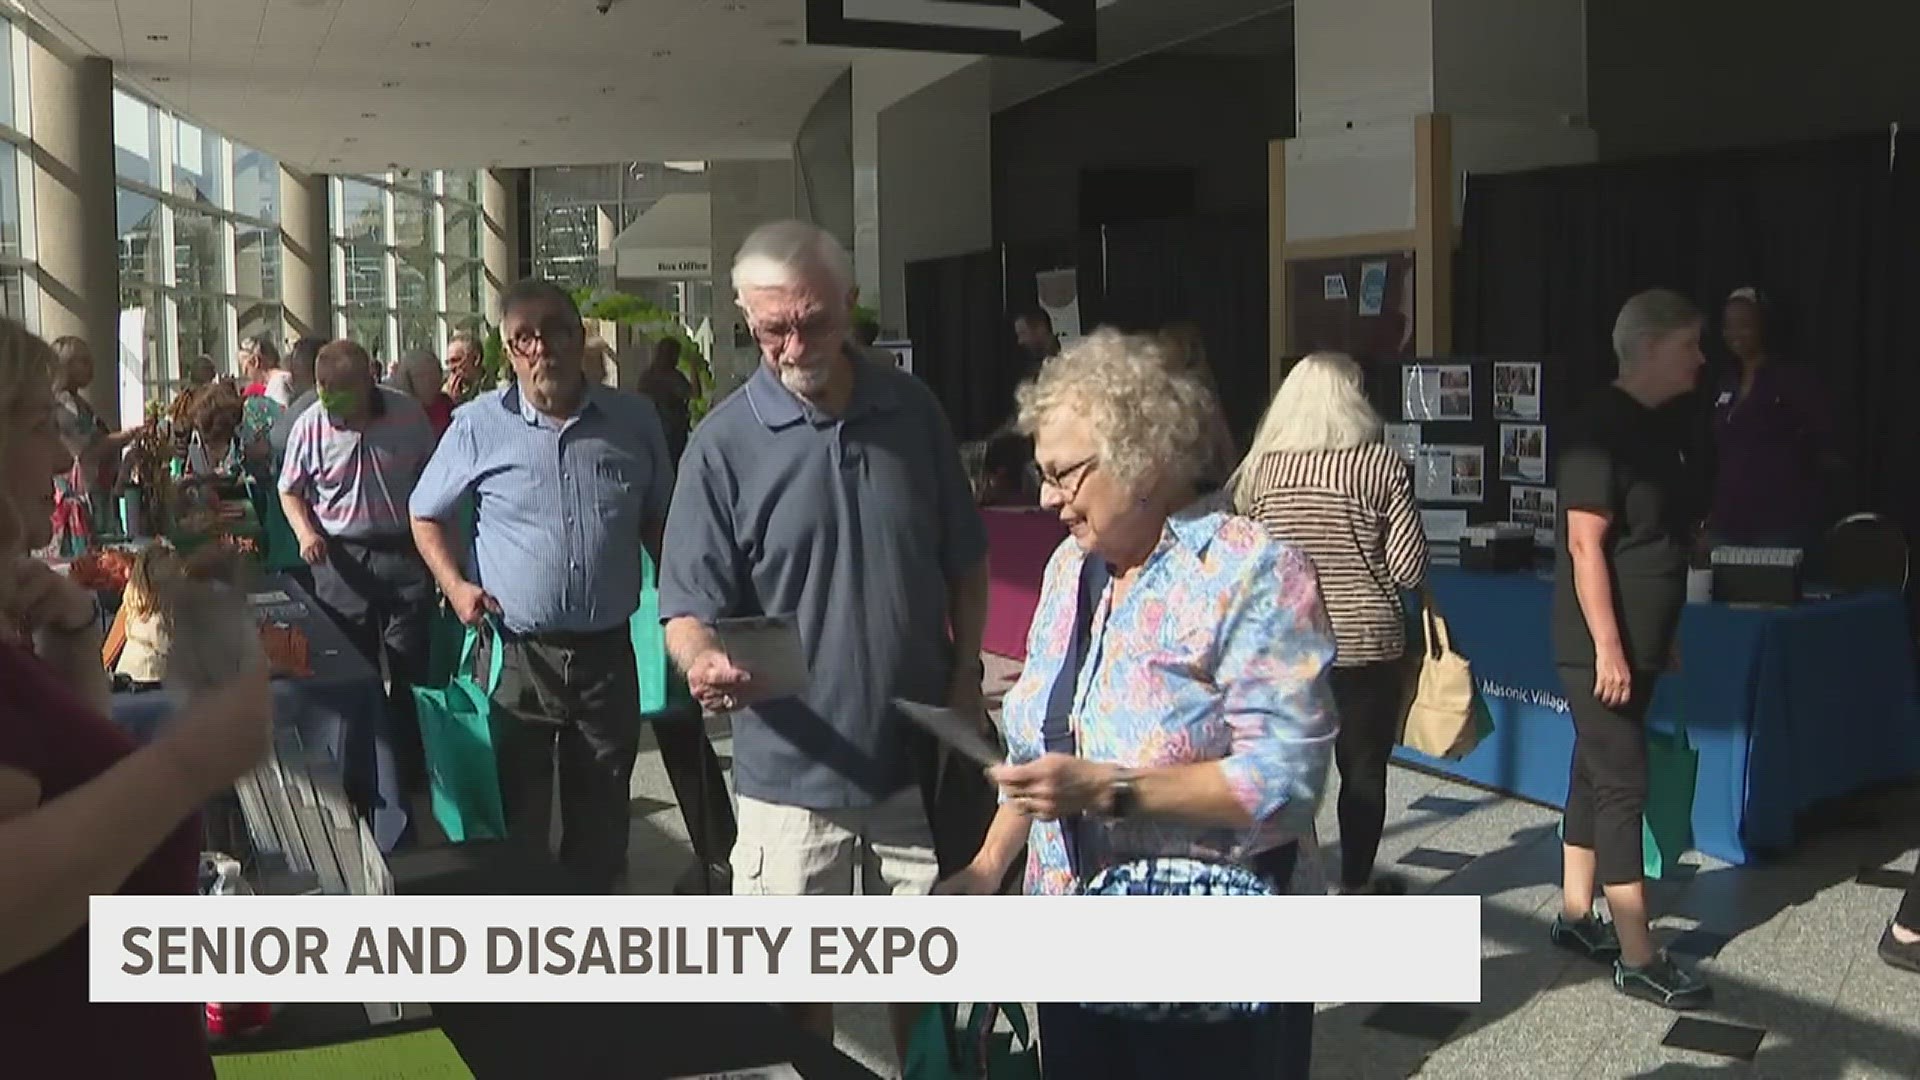 Making a comeback after the pandemic, the Senior and Disability Expo will showcase different resources and workshops.